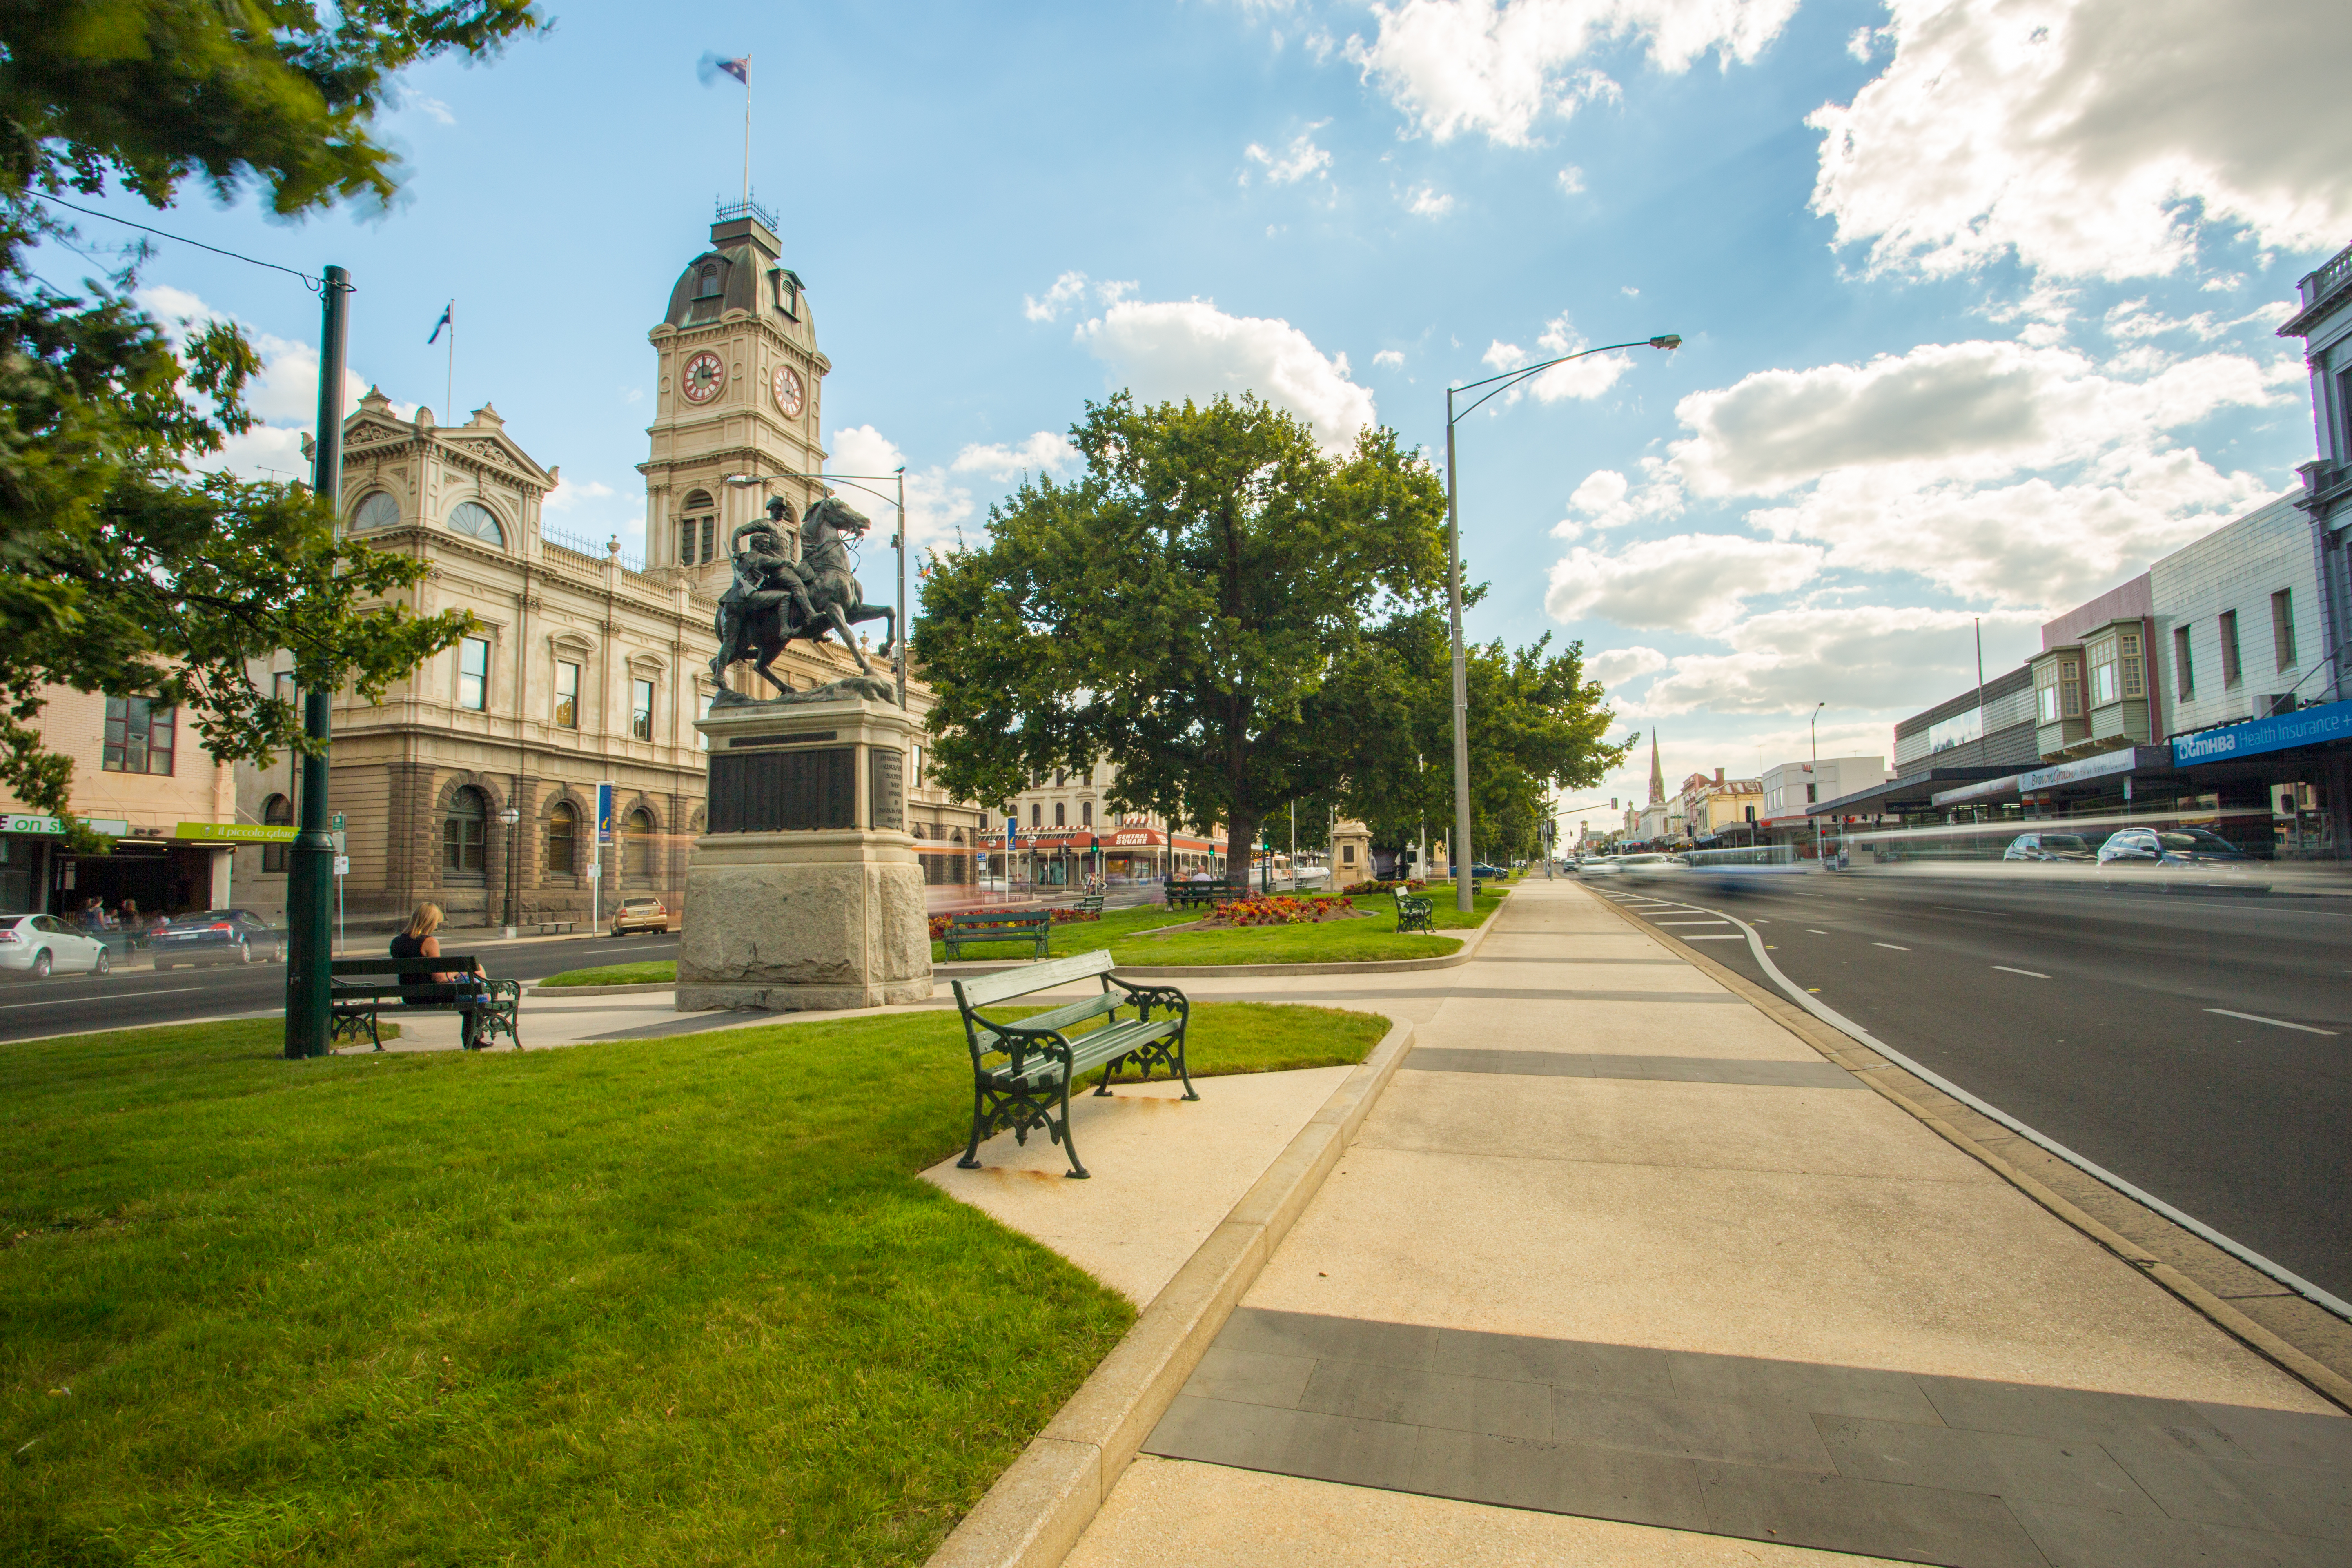 Image of Sturt Street looking west up the road with Town Hall in sight